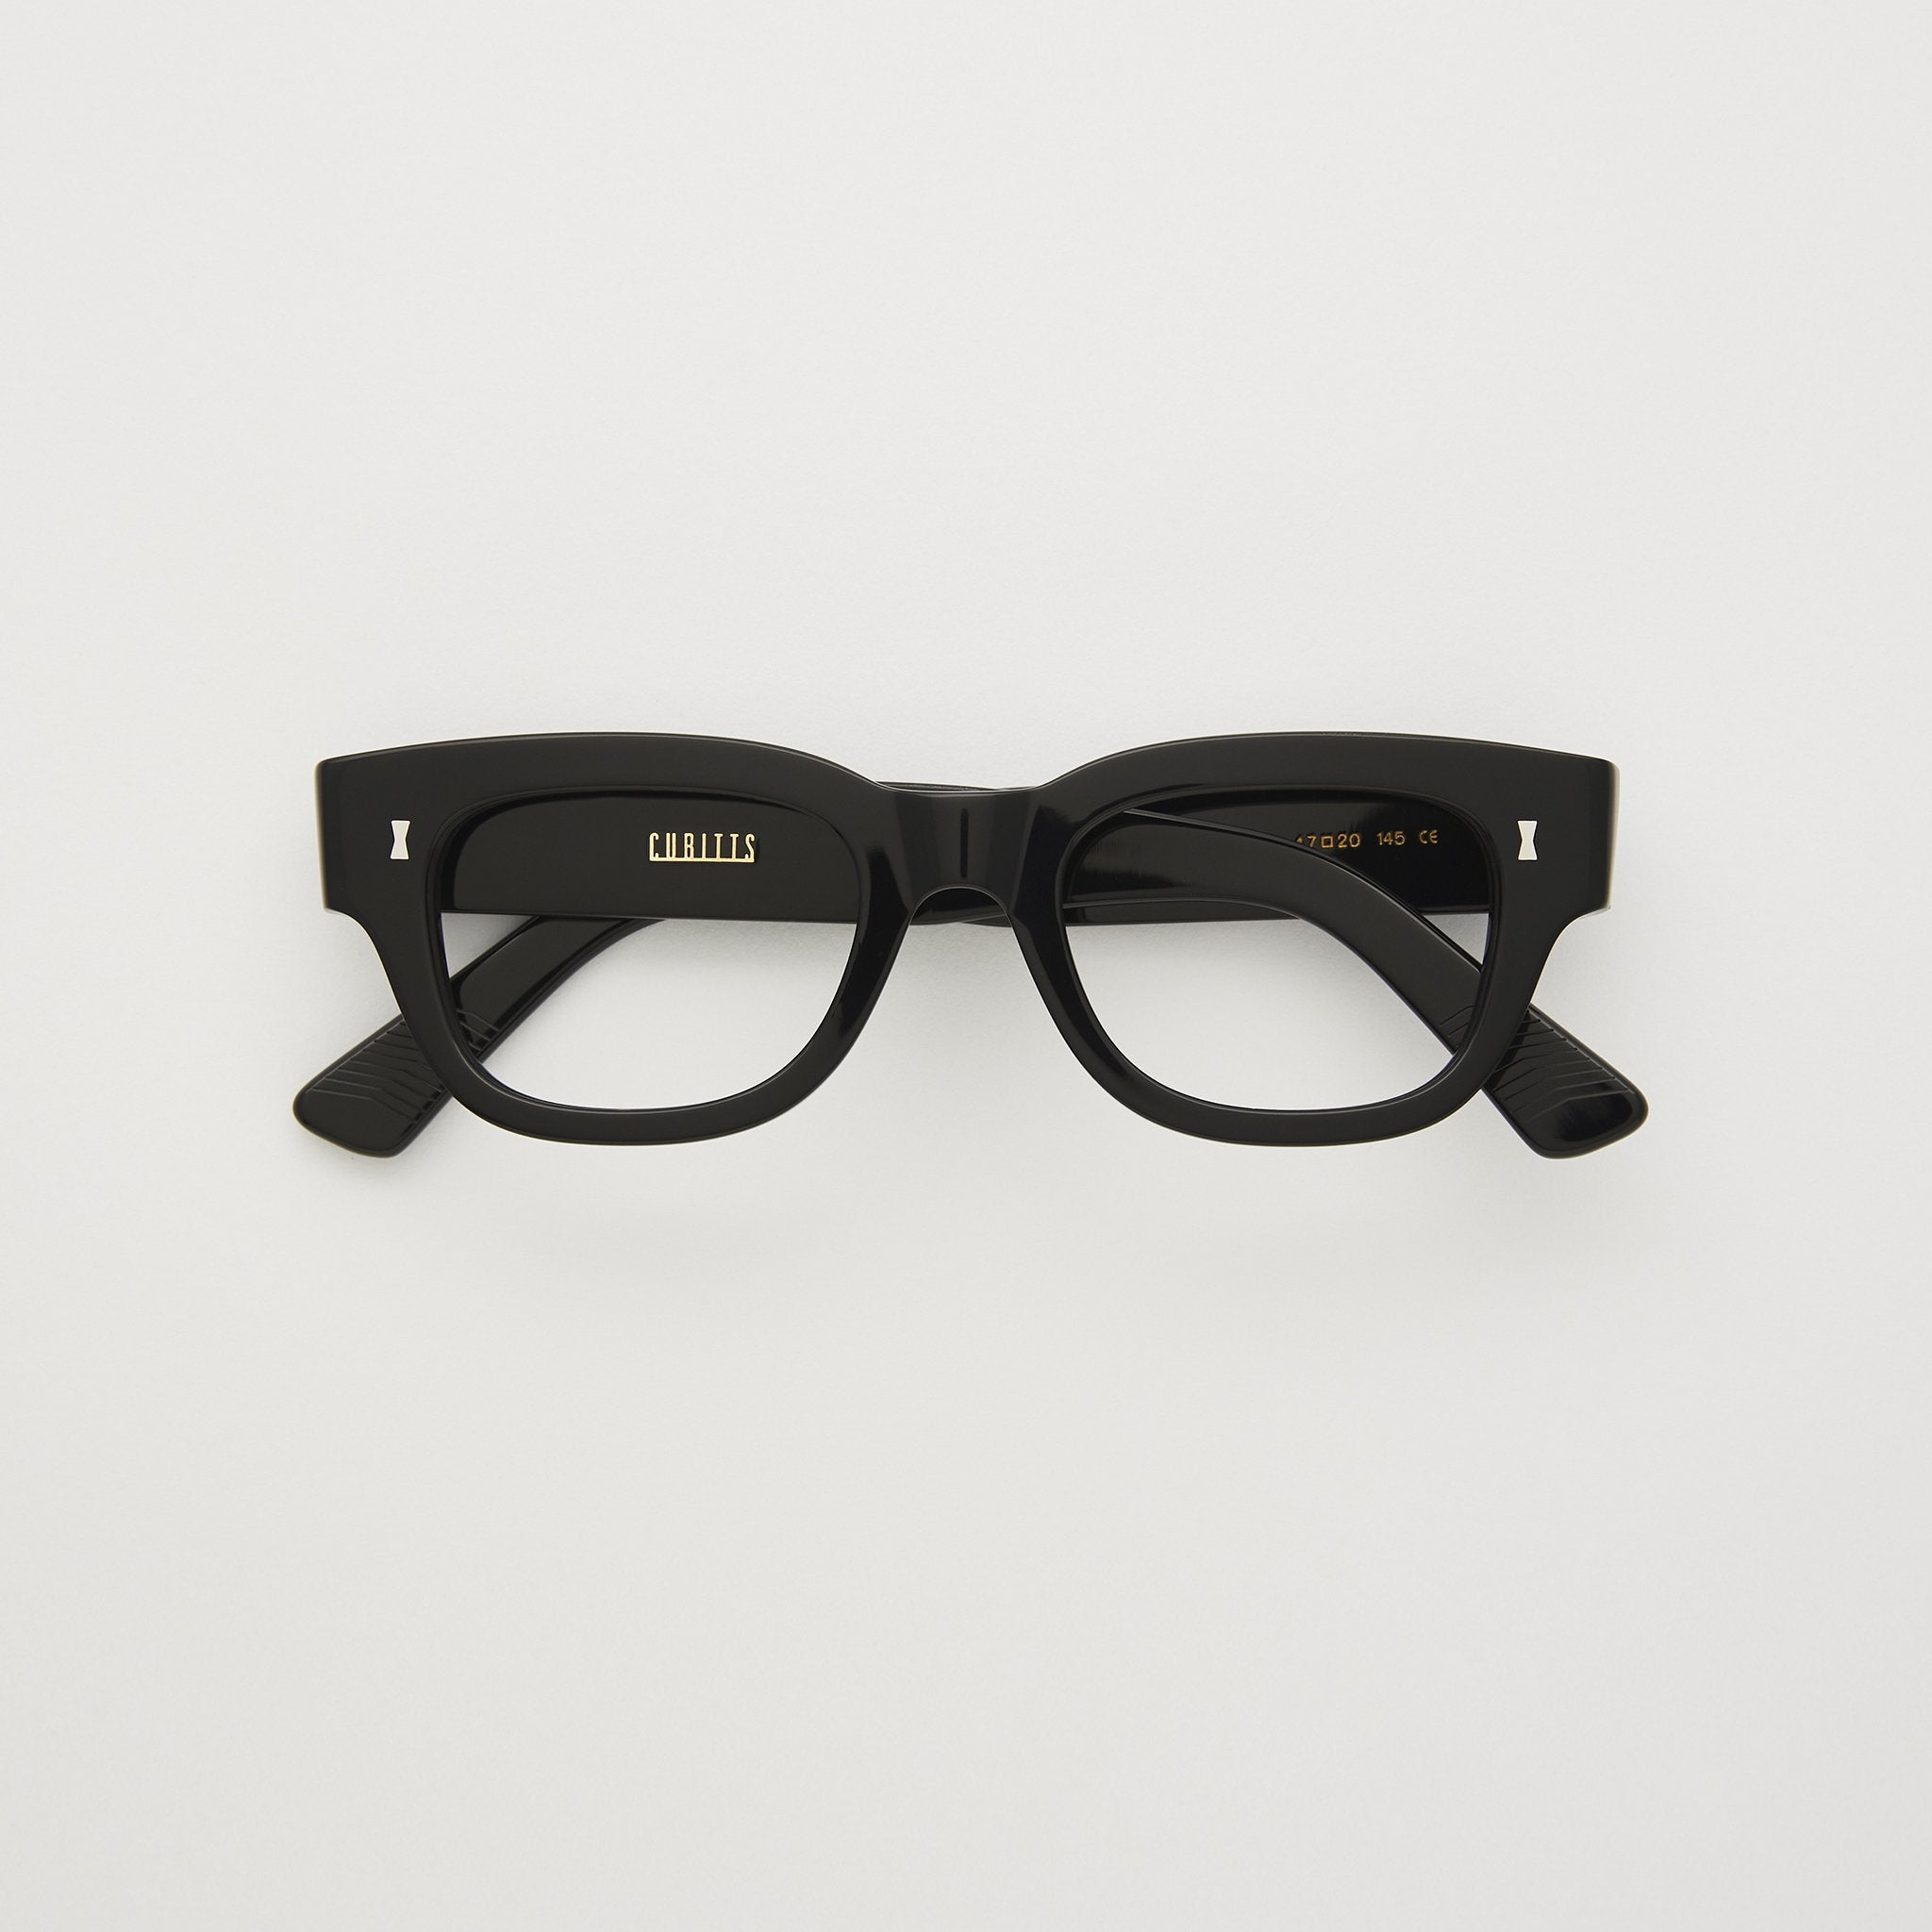 Frederick: Modern 1960s library glasses | Cubitts